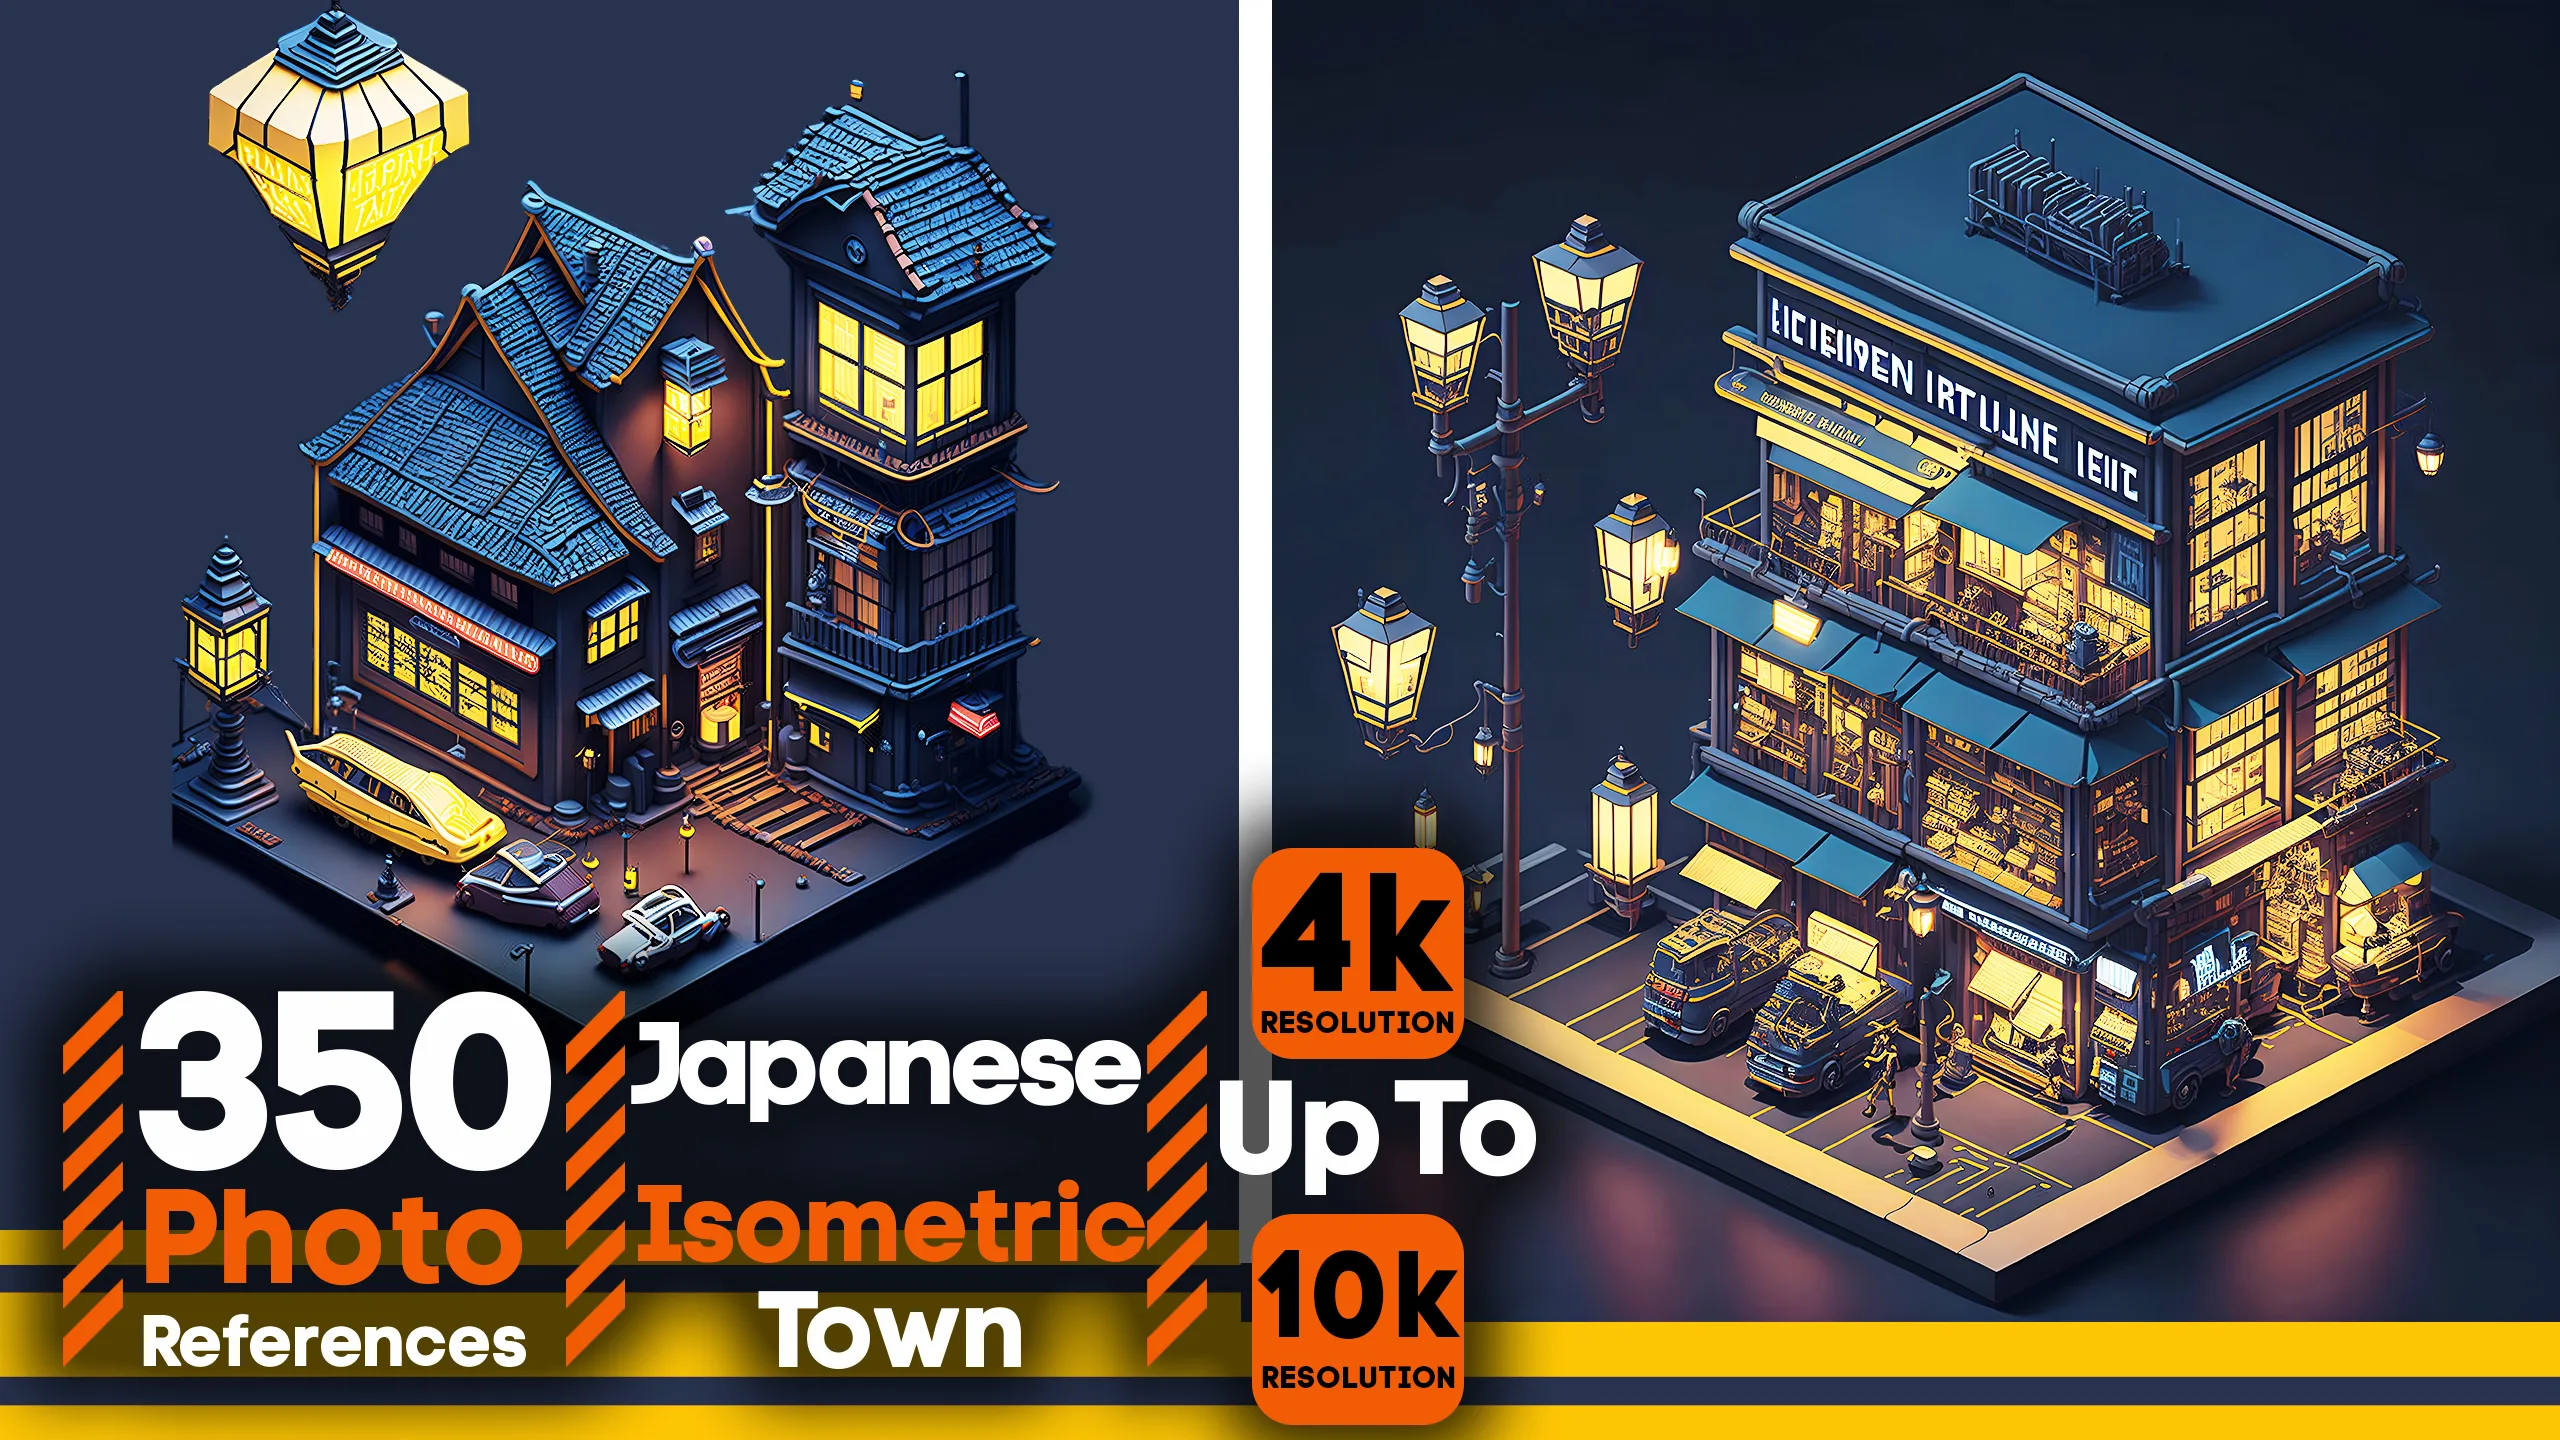 350 Japanese isometric town – Reference Pack - 4k up to 10k resolution - vol 1